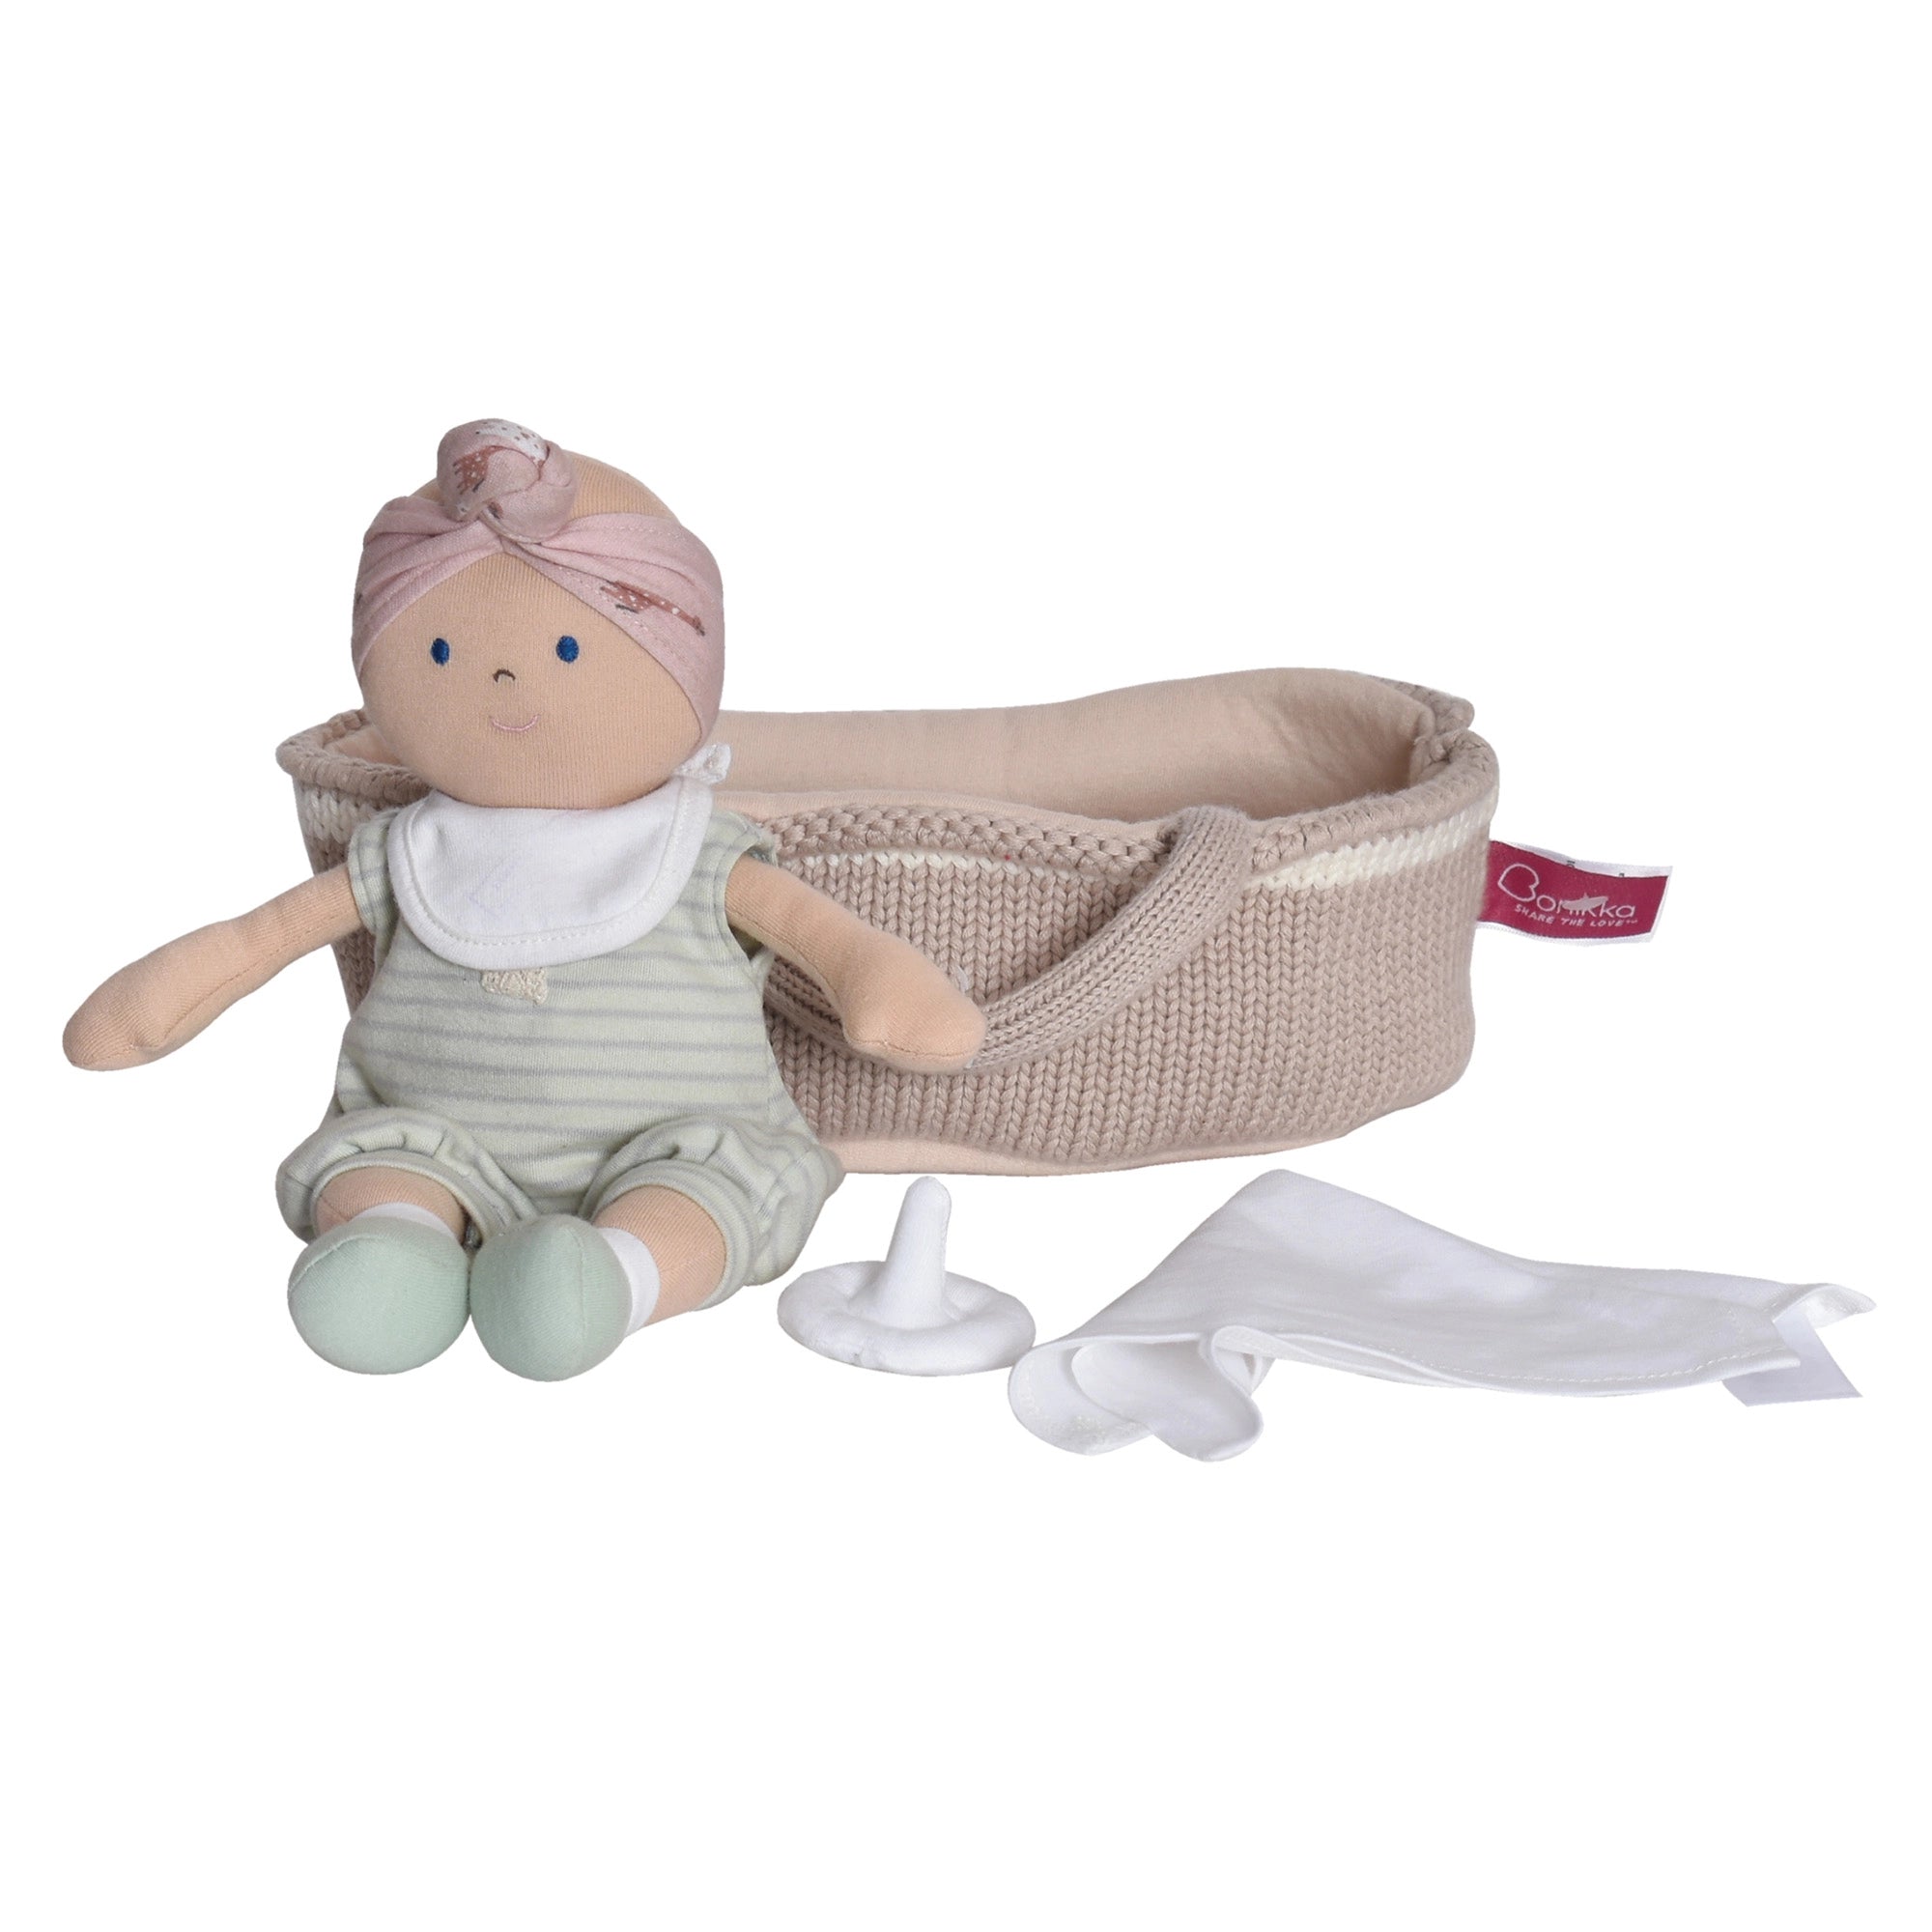 Knitted Carry Cot with Remi Baby - Light Skin, Soother & Blanket